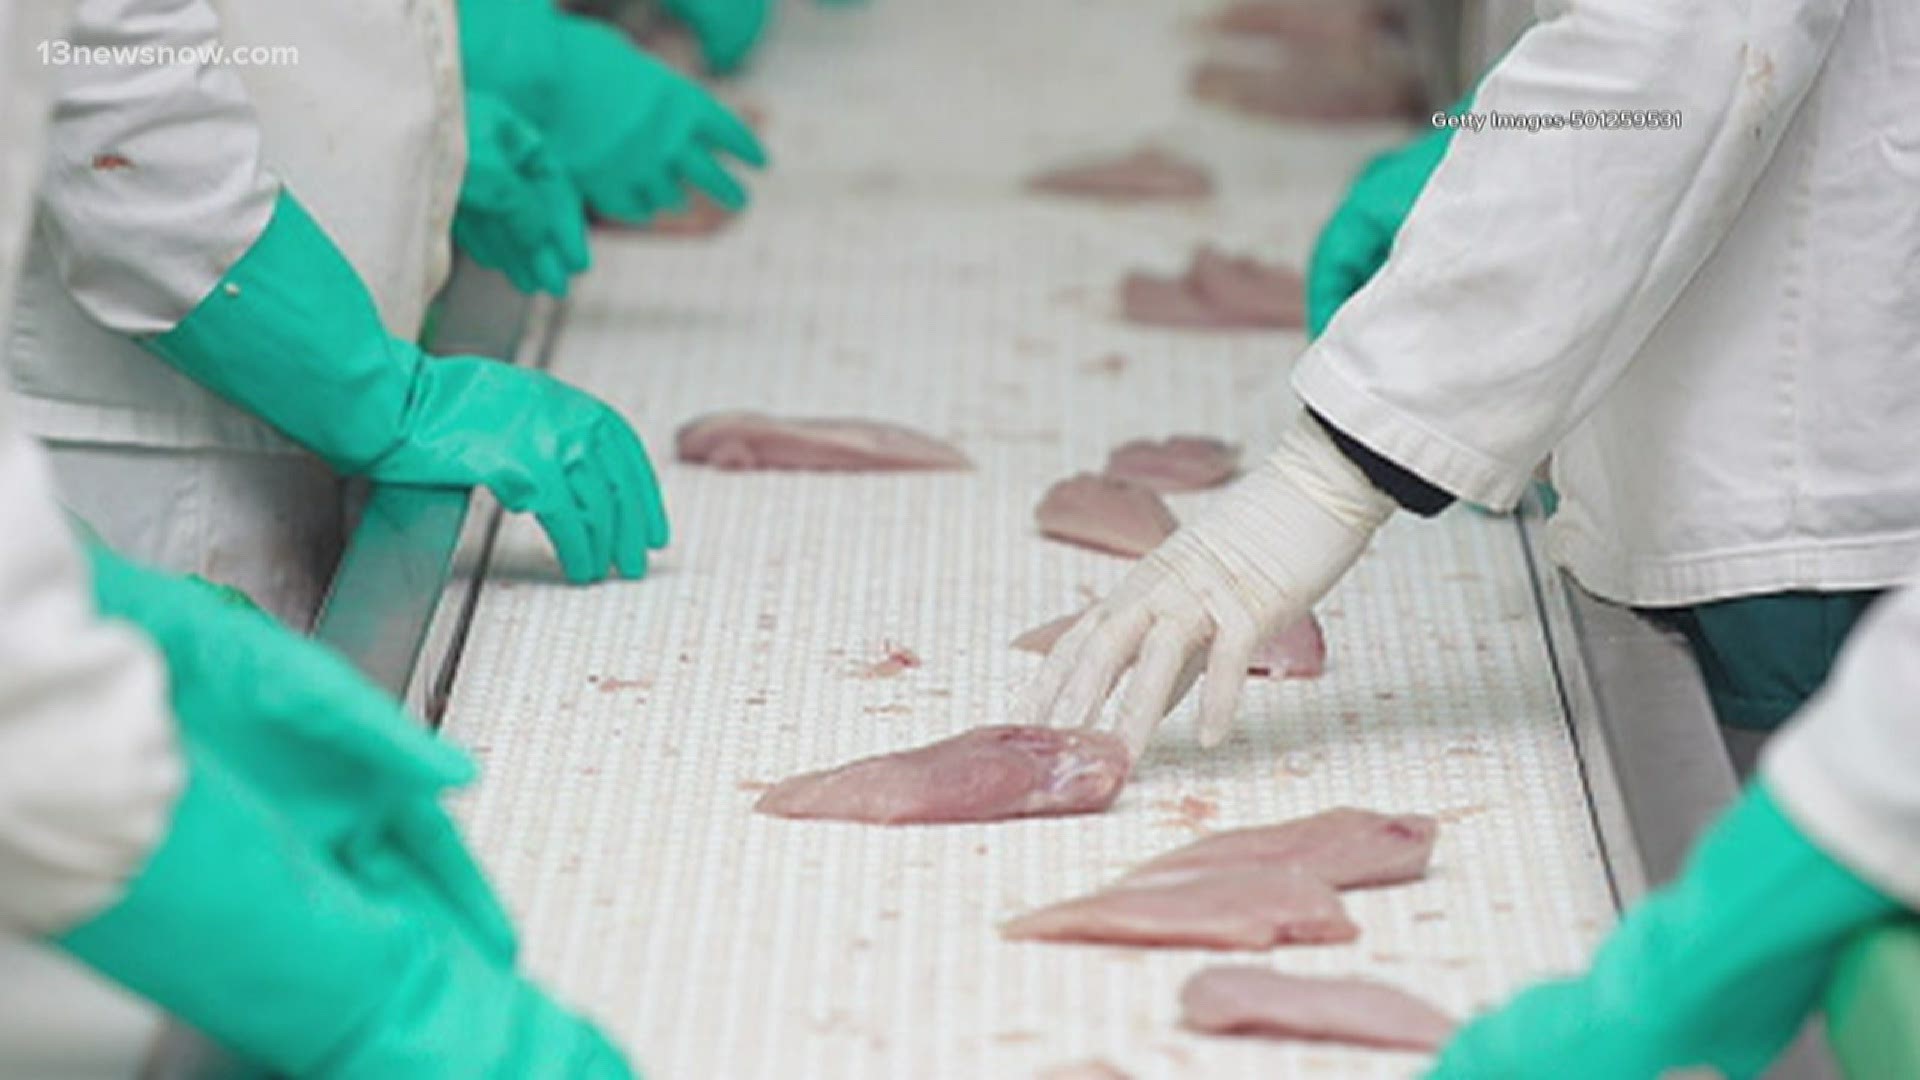 Union officials said more than 5,000 meat processing workers have gotten sick or been exposed to the new coronavirus.